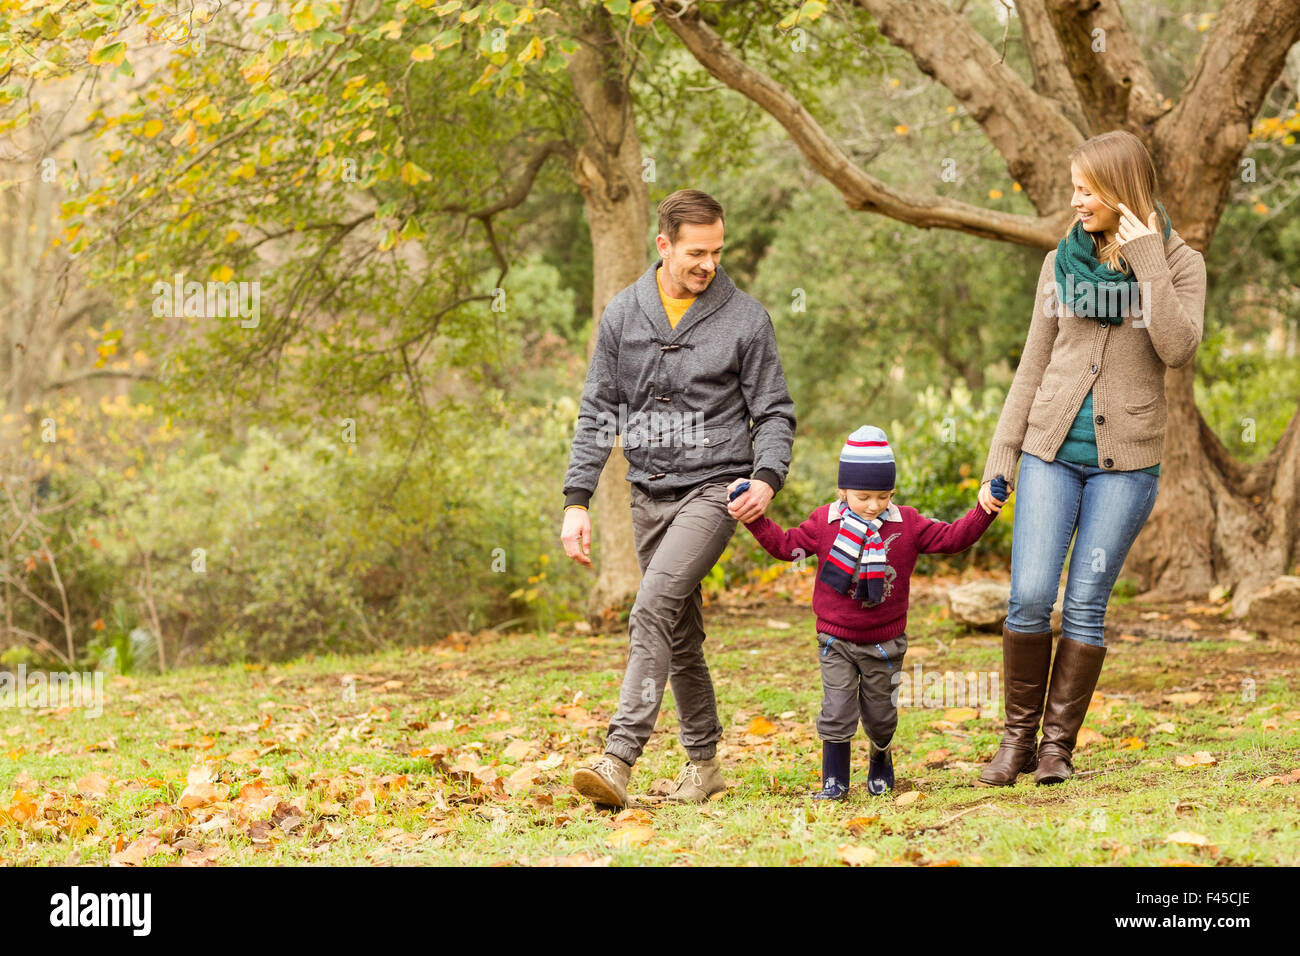 Smiling young family walking together Stock Photo